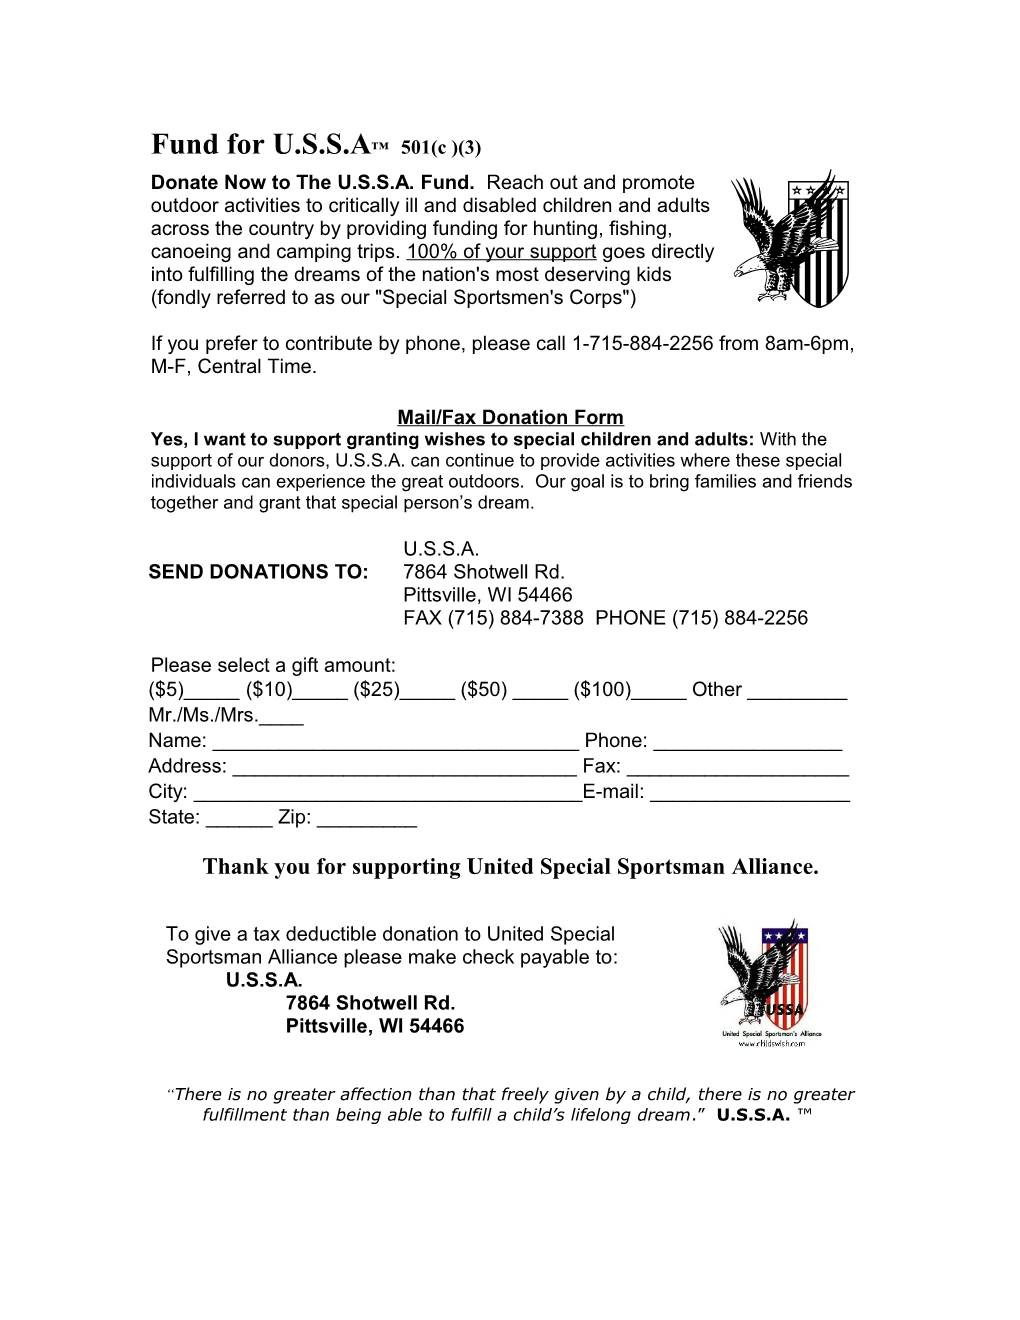 Mail/Fax Donation Form